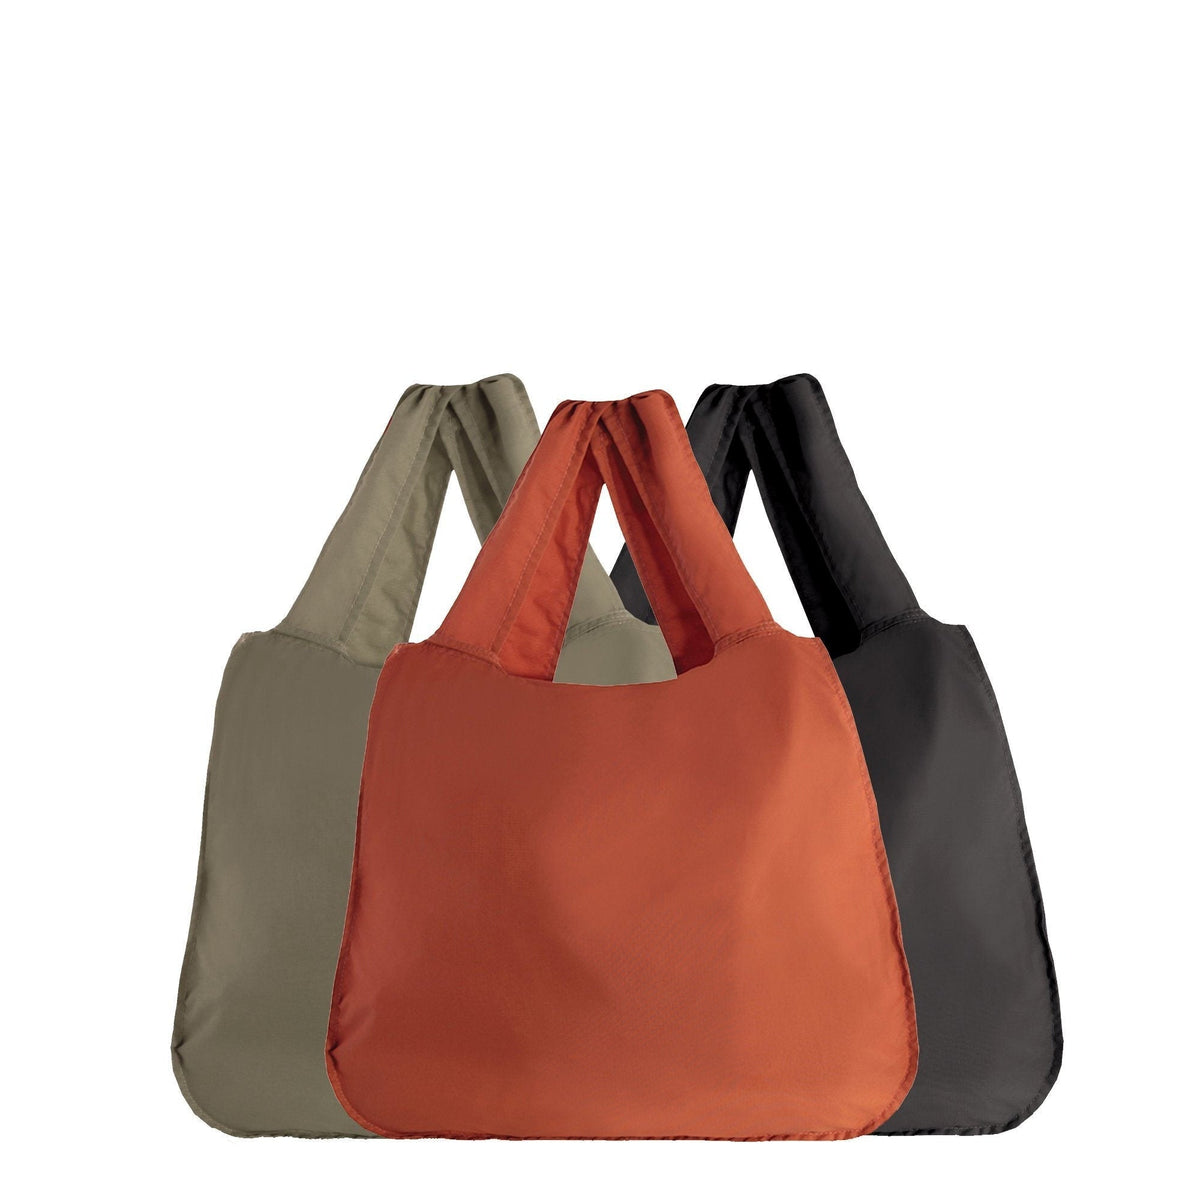 Recycled Polyester ECOSHOPA Convertible Tote & Backpack - 3 PACK (Taupe, Orange, Black)